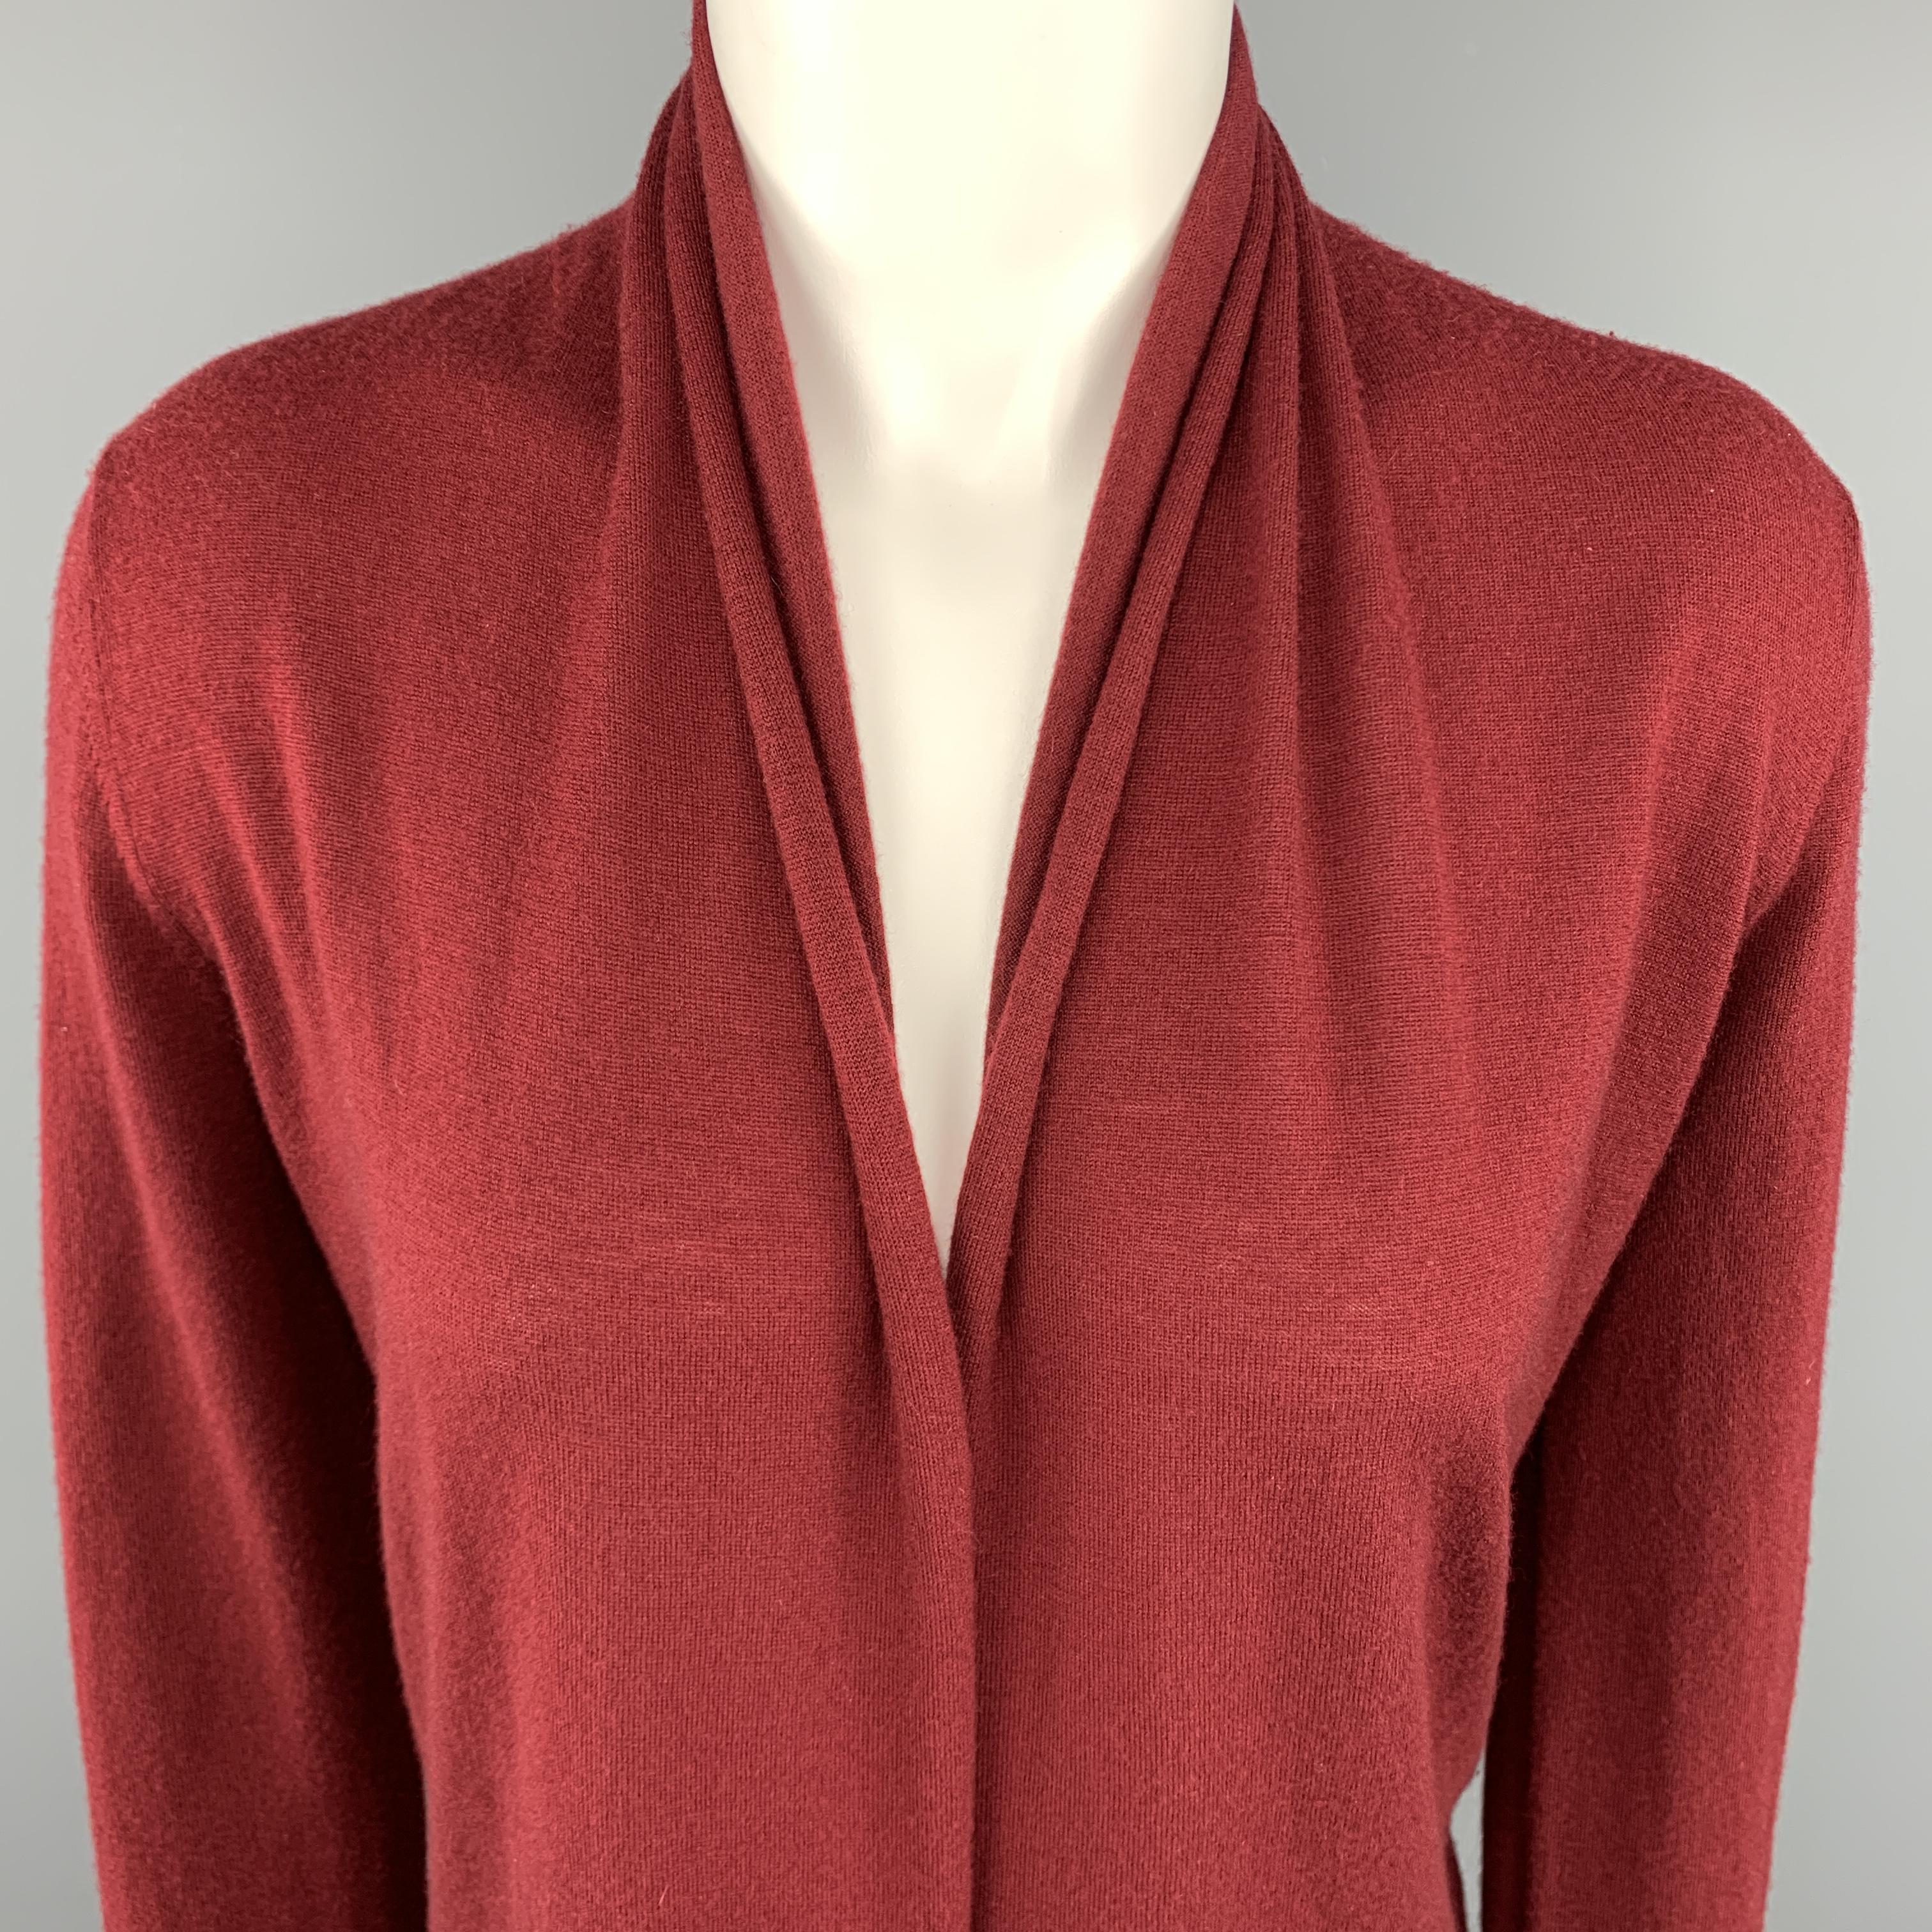 DONNA KARAN Cardigan Sweater comes in a burgundy tone in a solid knitted cashmere material, Open Front, with raw hems and long sleeves. Minor wear at back.
 
Very Good Pre-Owned Condition.
Marked: S
 
Measurements:
 
Shoulder: 15.5 in.  
Bust: 34